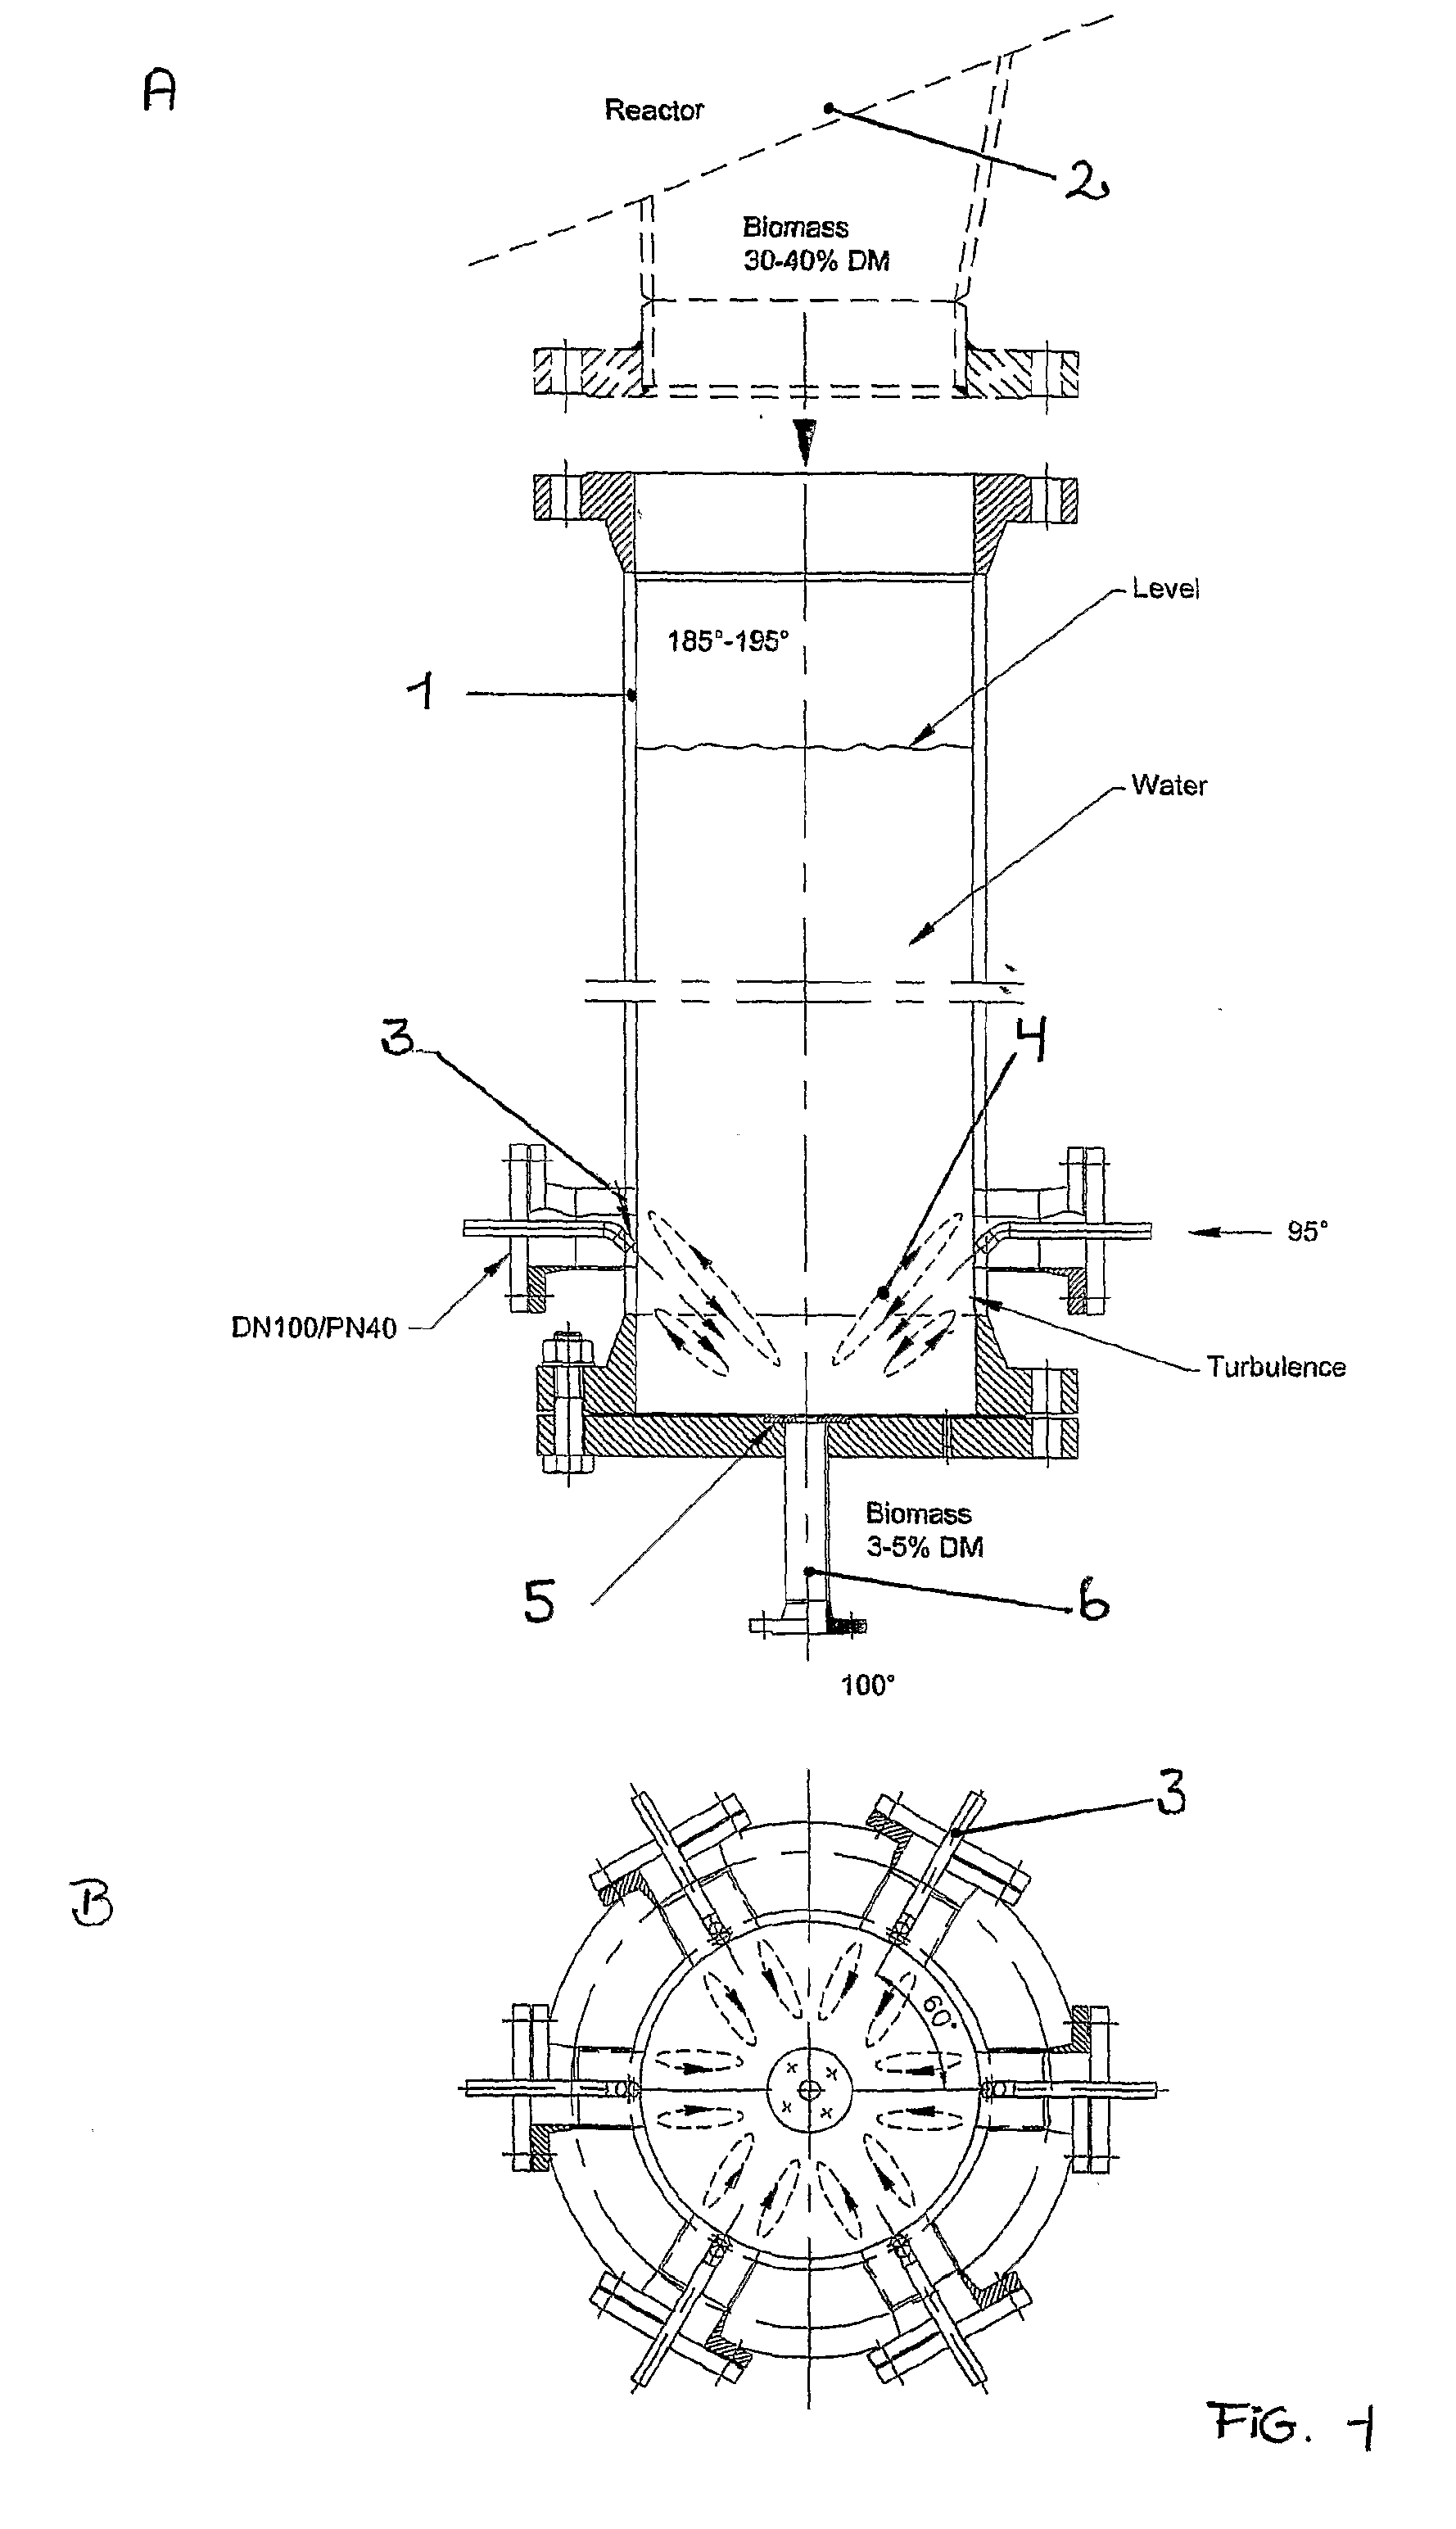 Device and methods for discharging pretreated biomass from higher to lower pressure regions